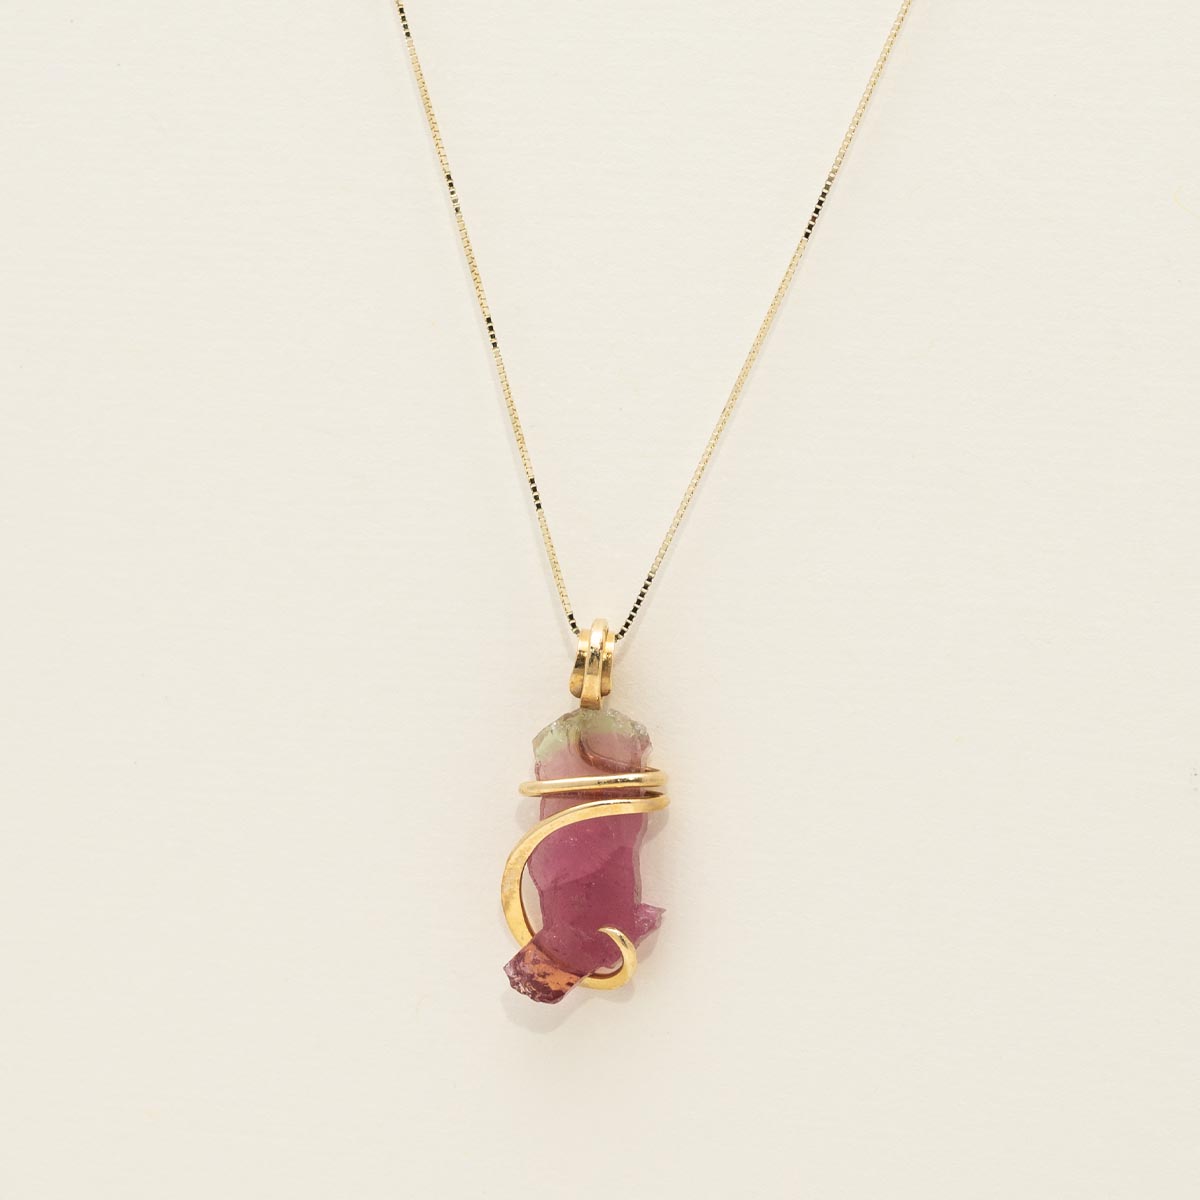 Maine Bicolor Tourmaline Necklace in 14kt Yellow Gold